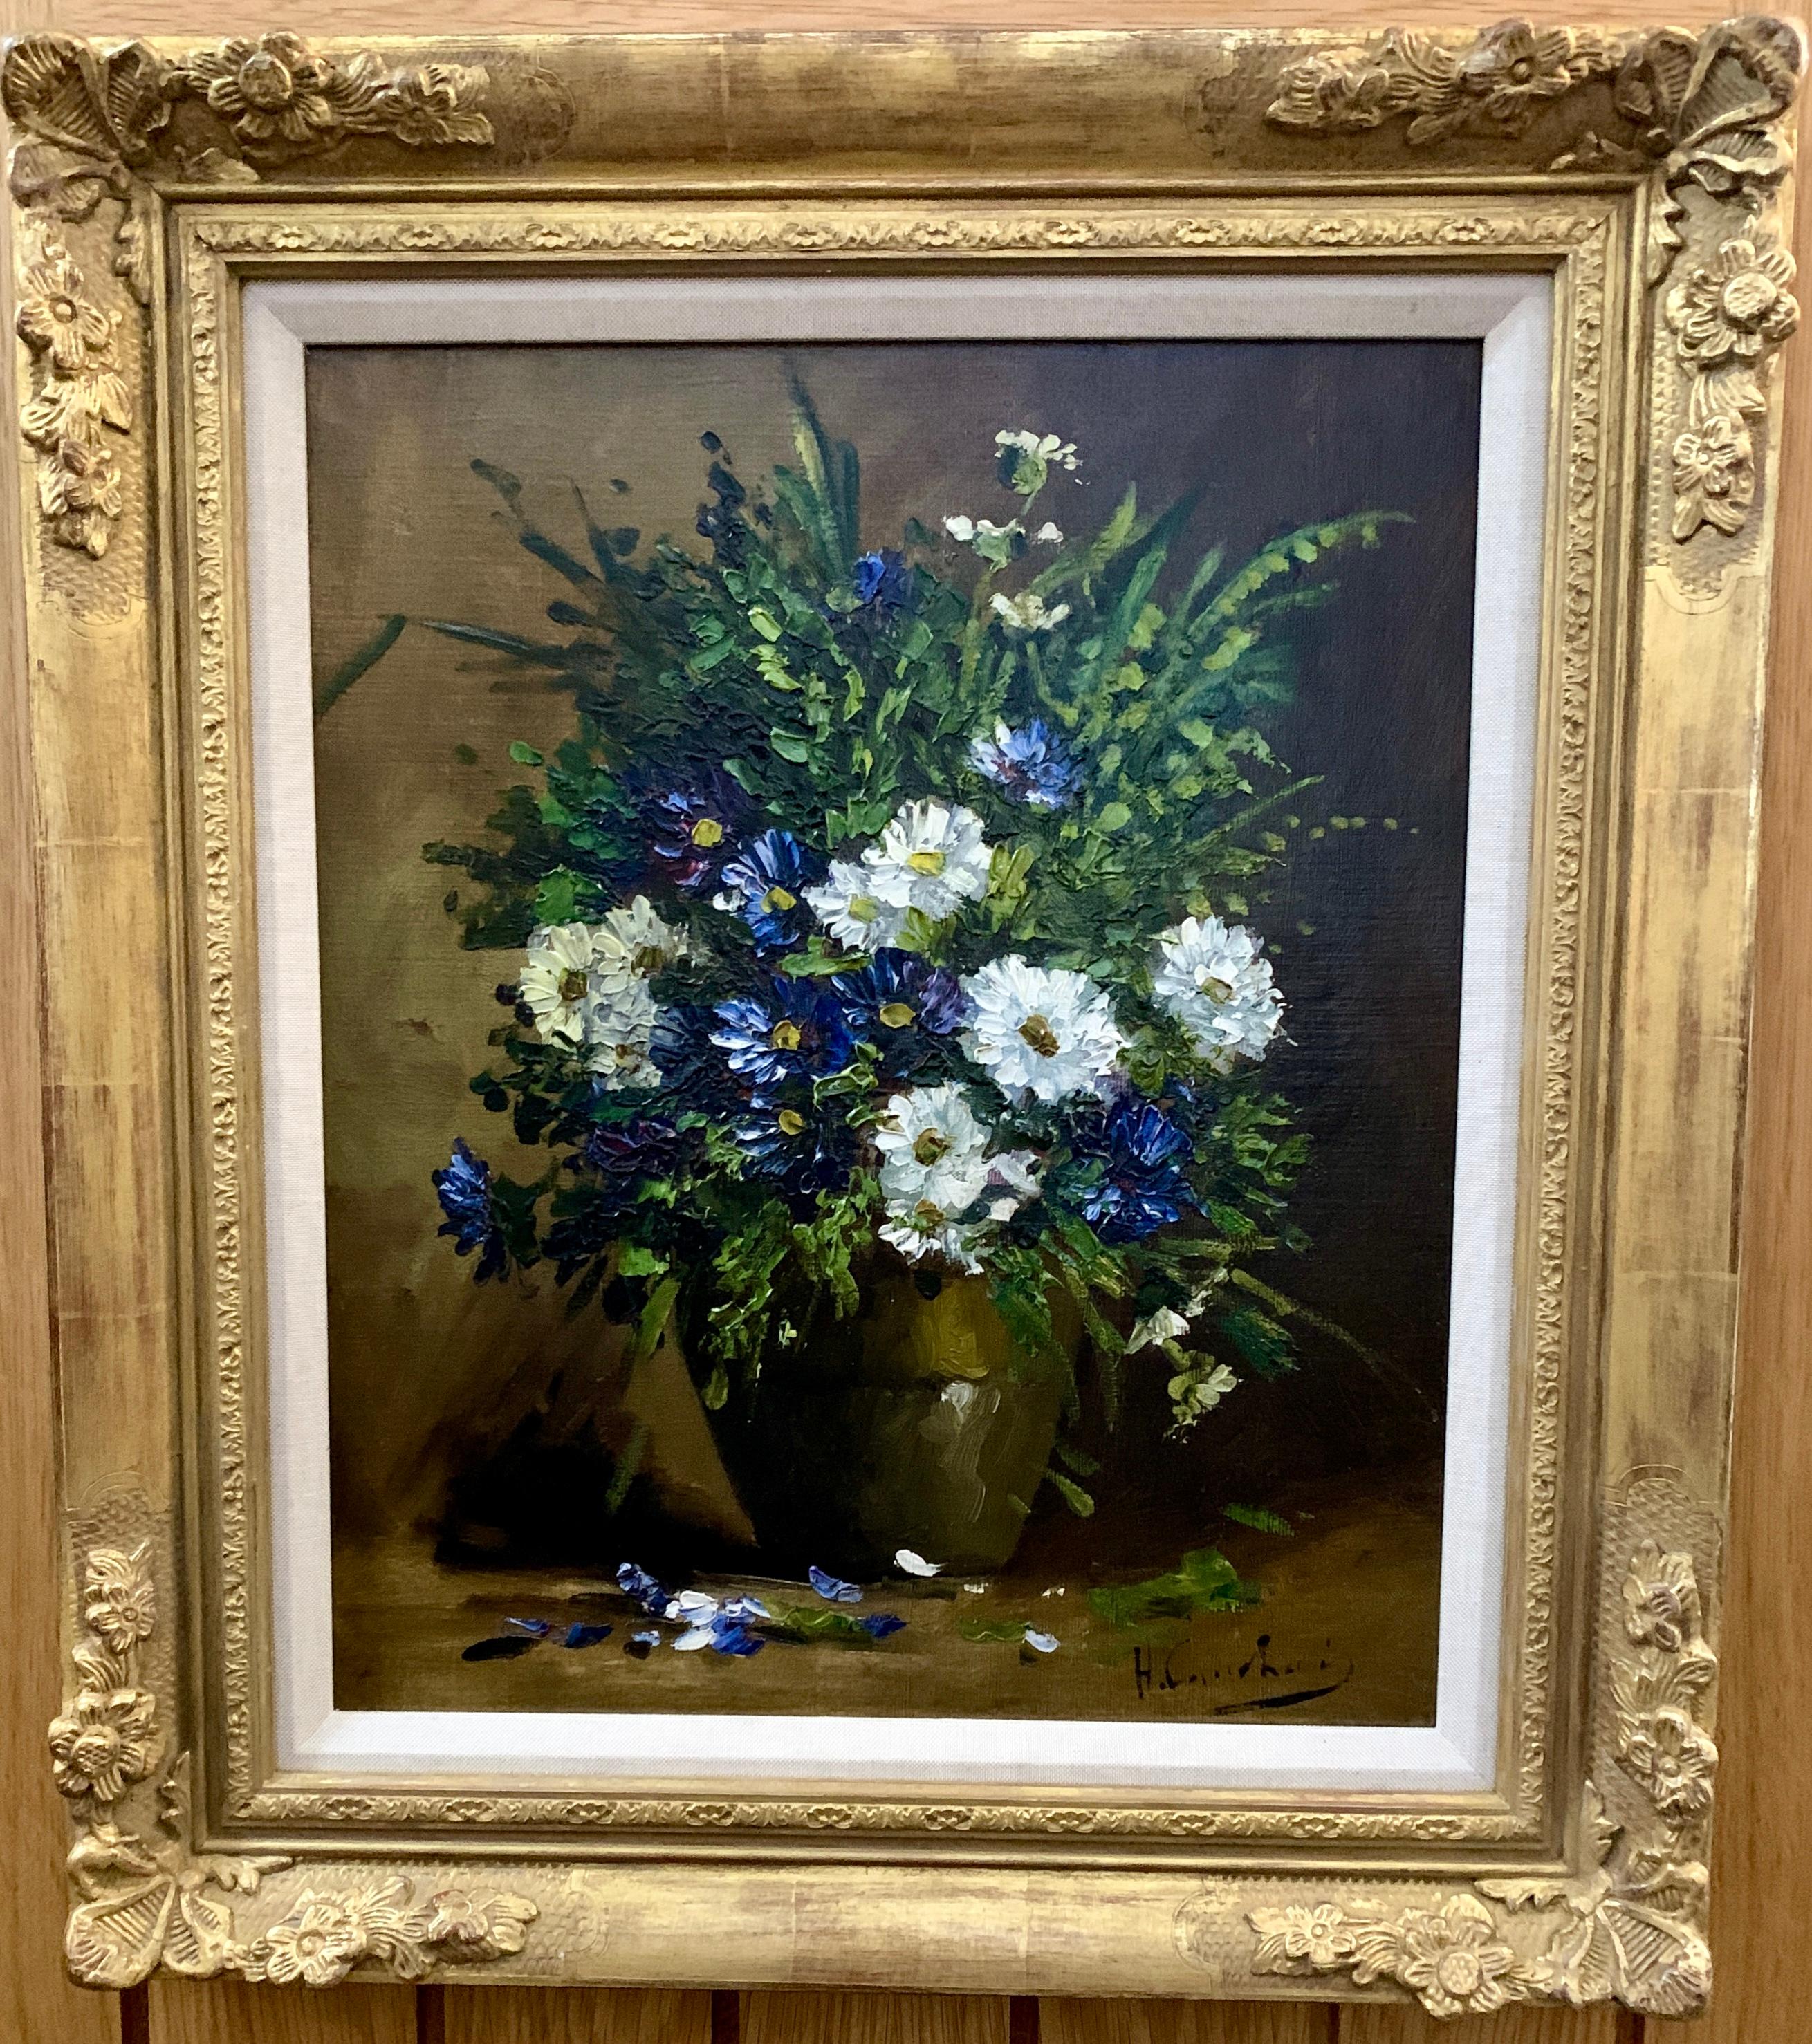 French early 20th century Still life of blue, white and green flowers in a vase - Painting by Eugene Henri Cauchois